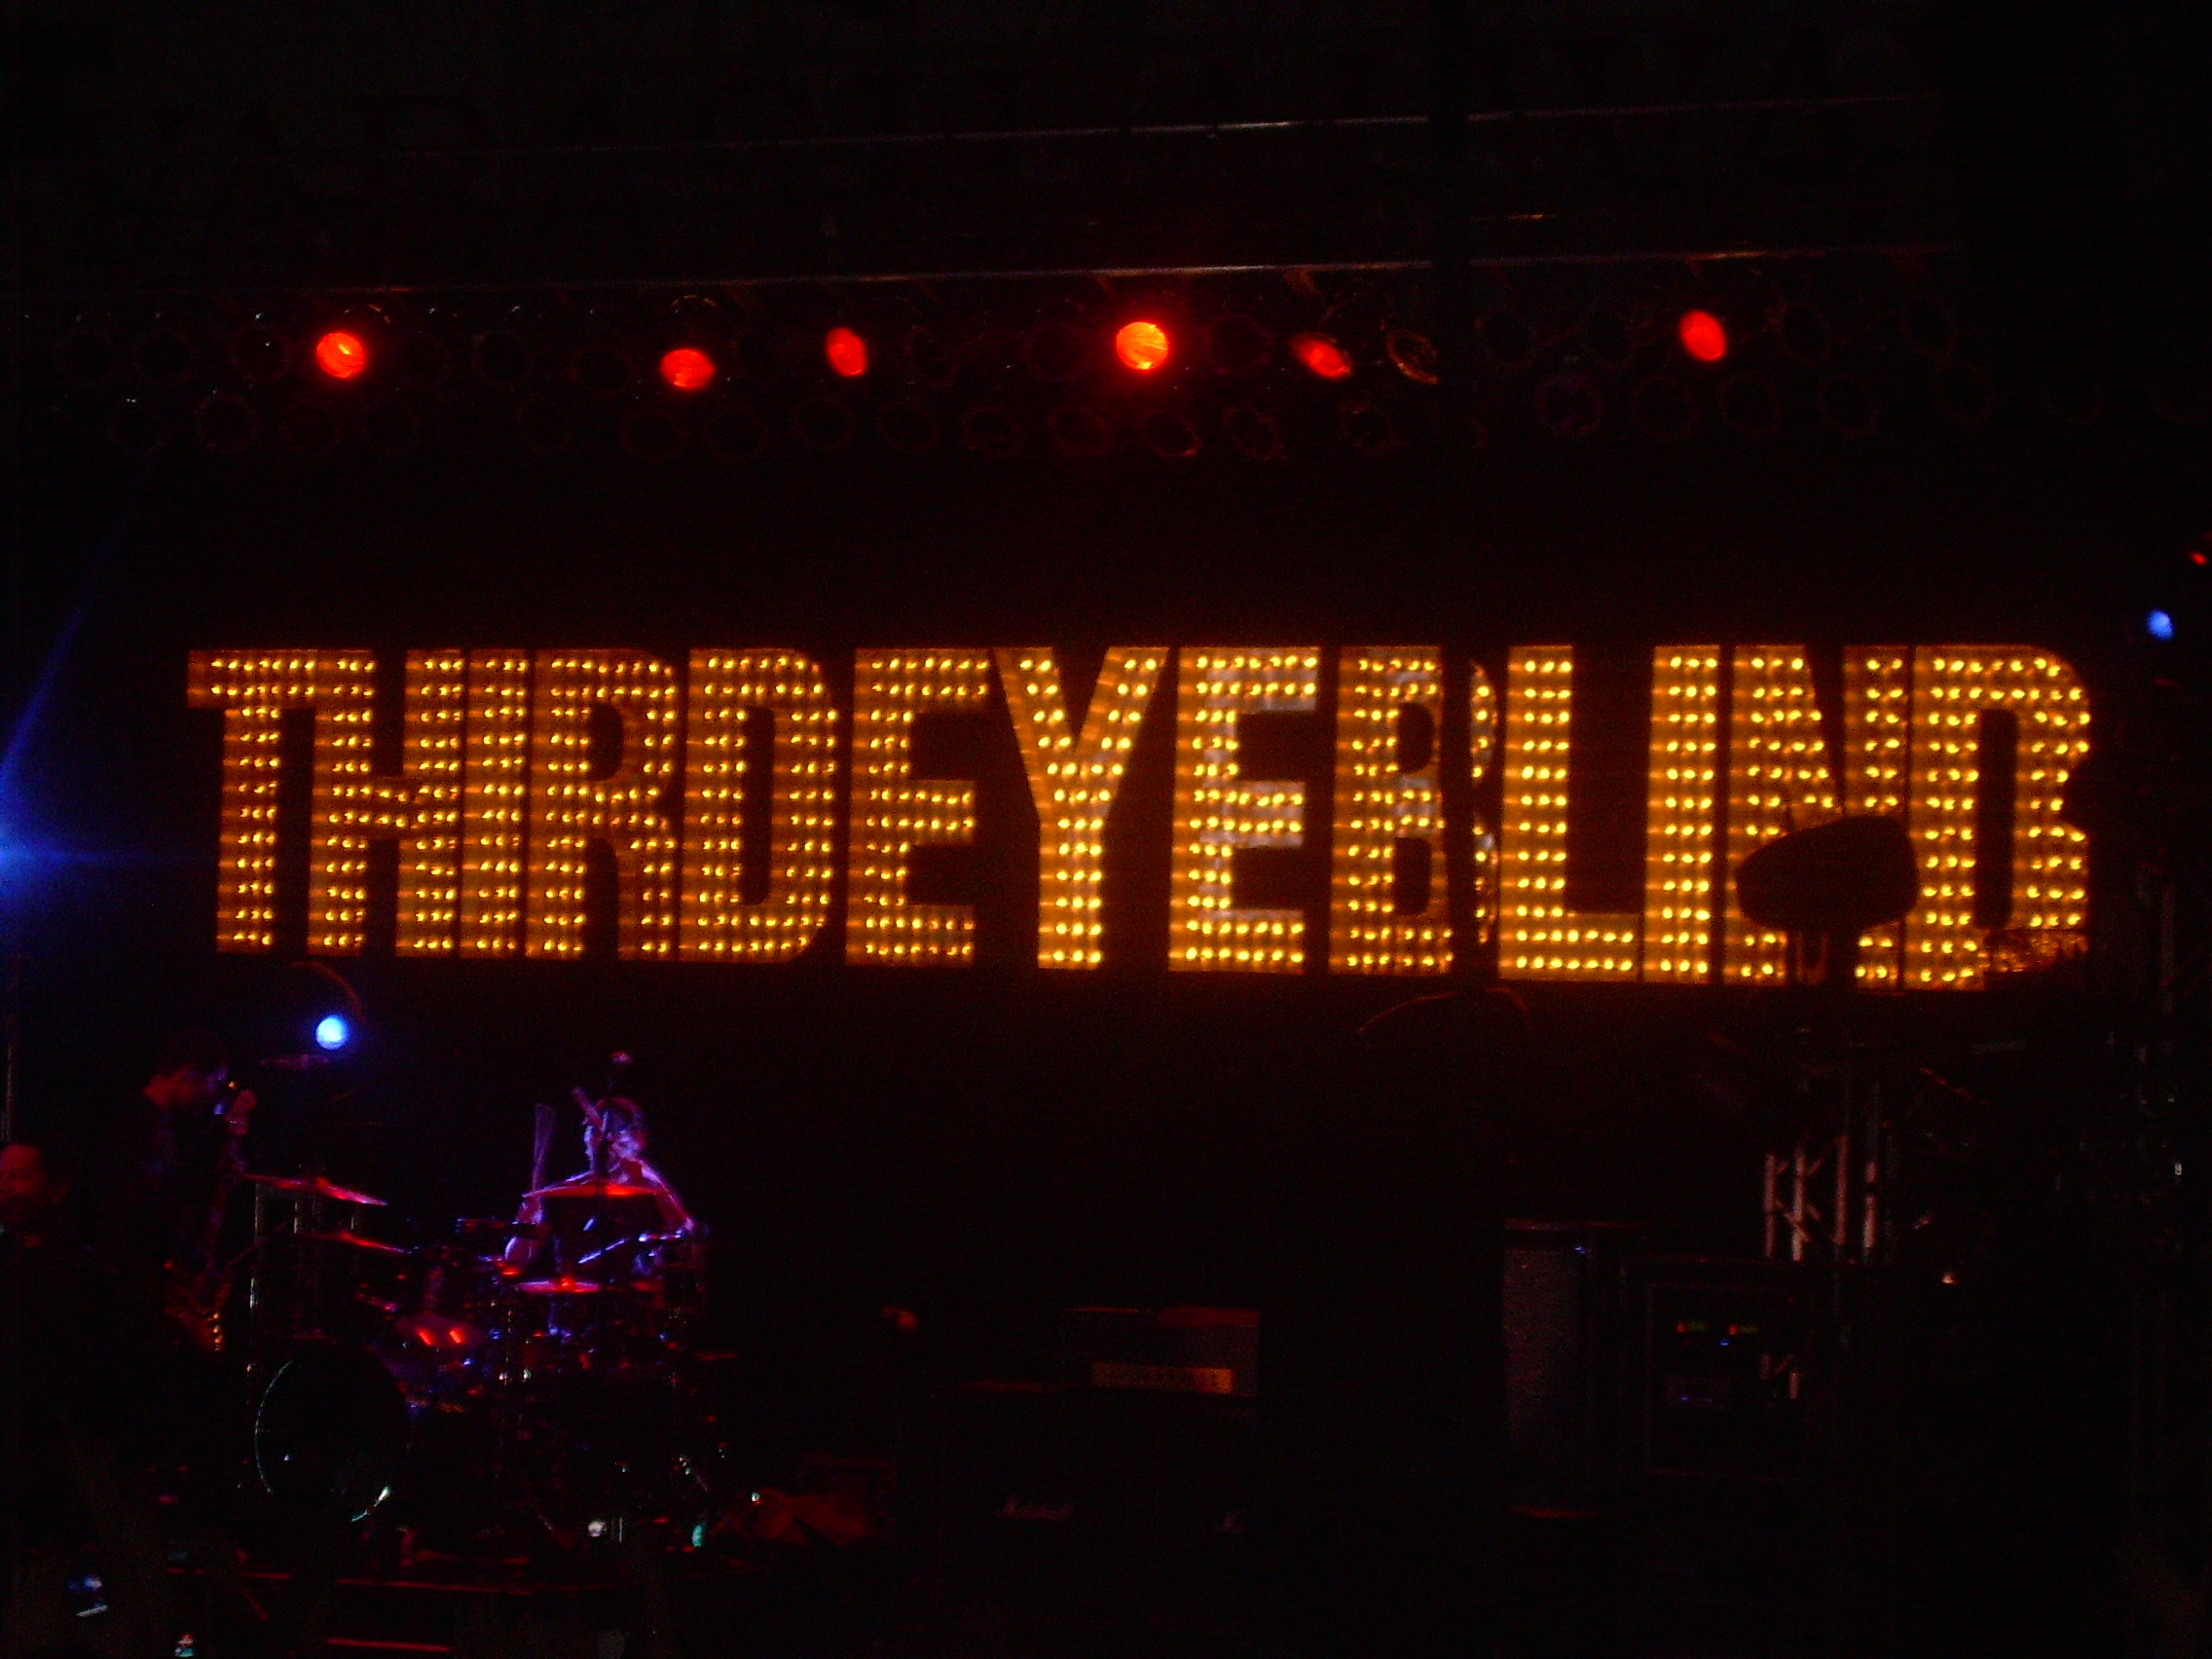 Perfect Song Thursday Third Eye Blind Motorcycle Drive By Images, Photos, Reviews